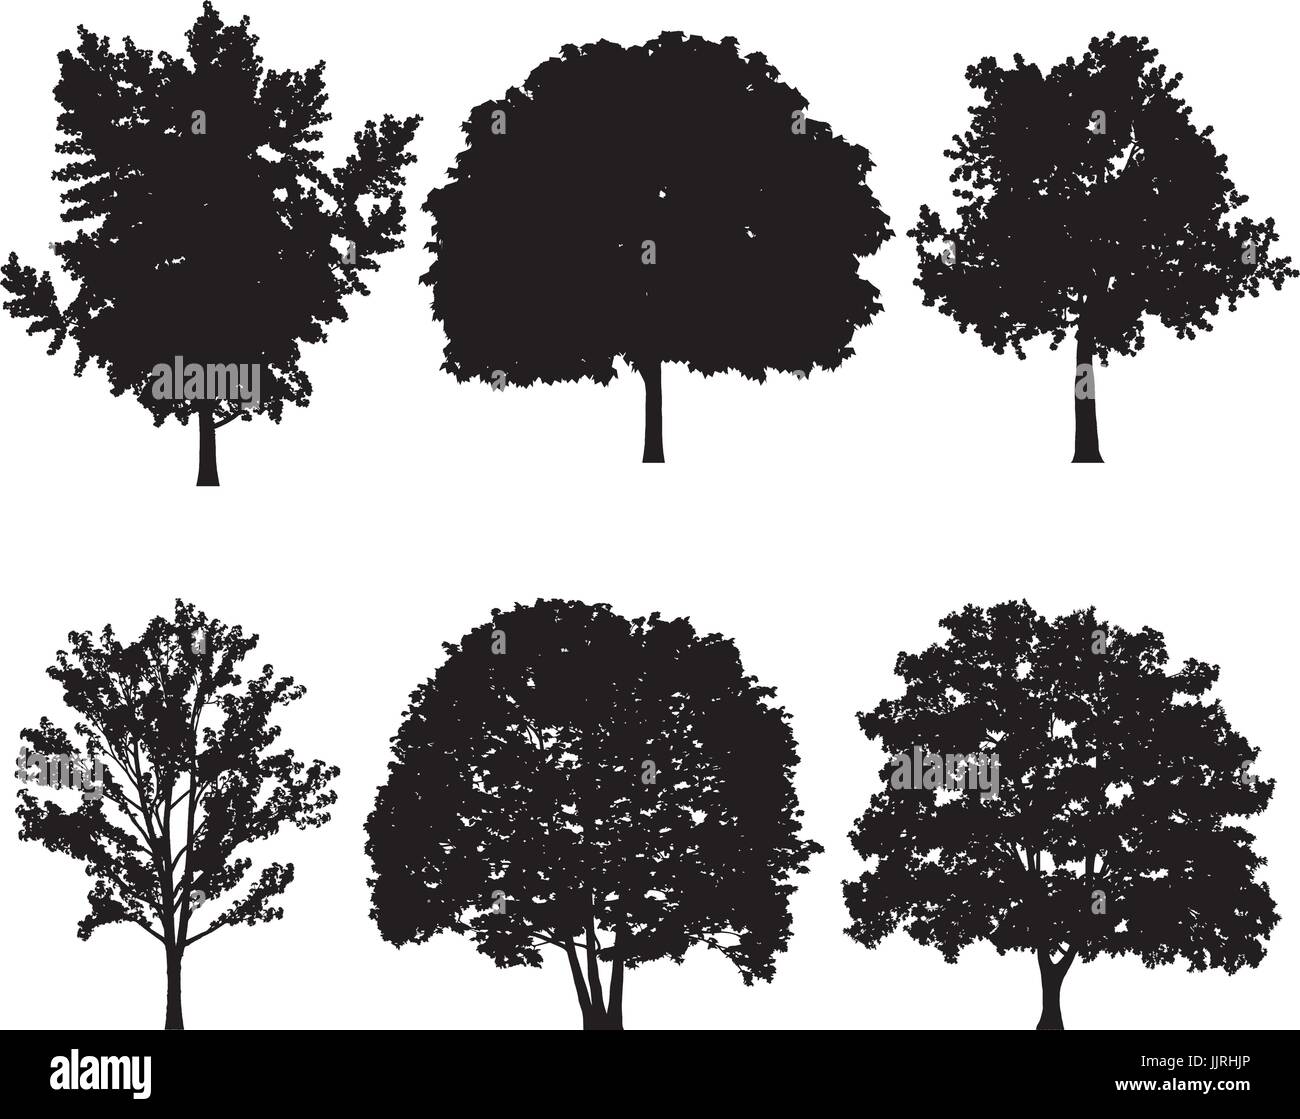 Vector illustration of tree silhouettes   Stock Vector